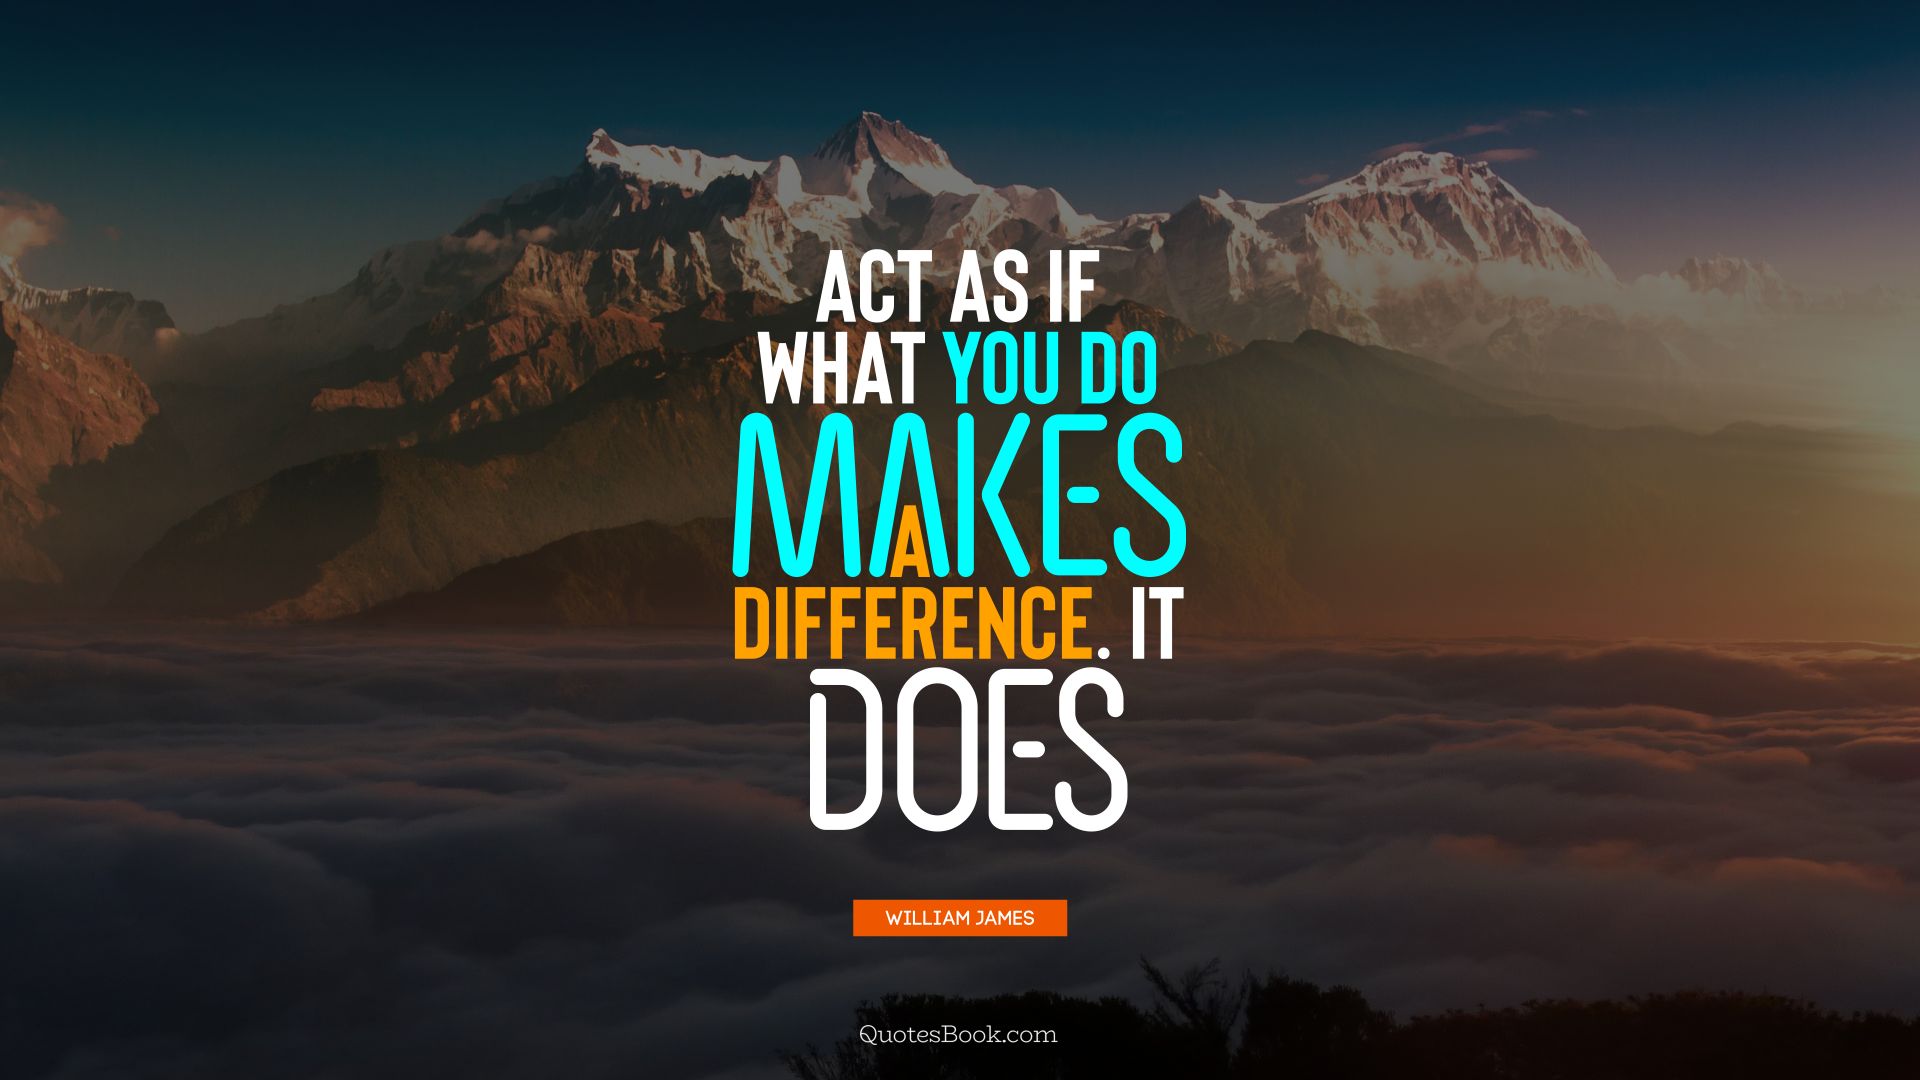 Act as if what you do makes a difference. It does. - Quote by William James